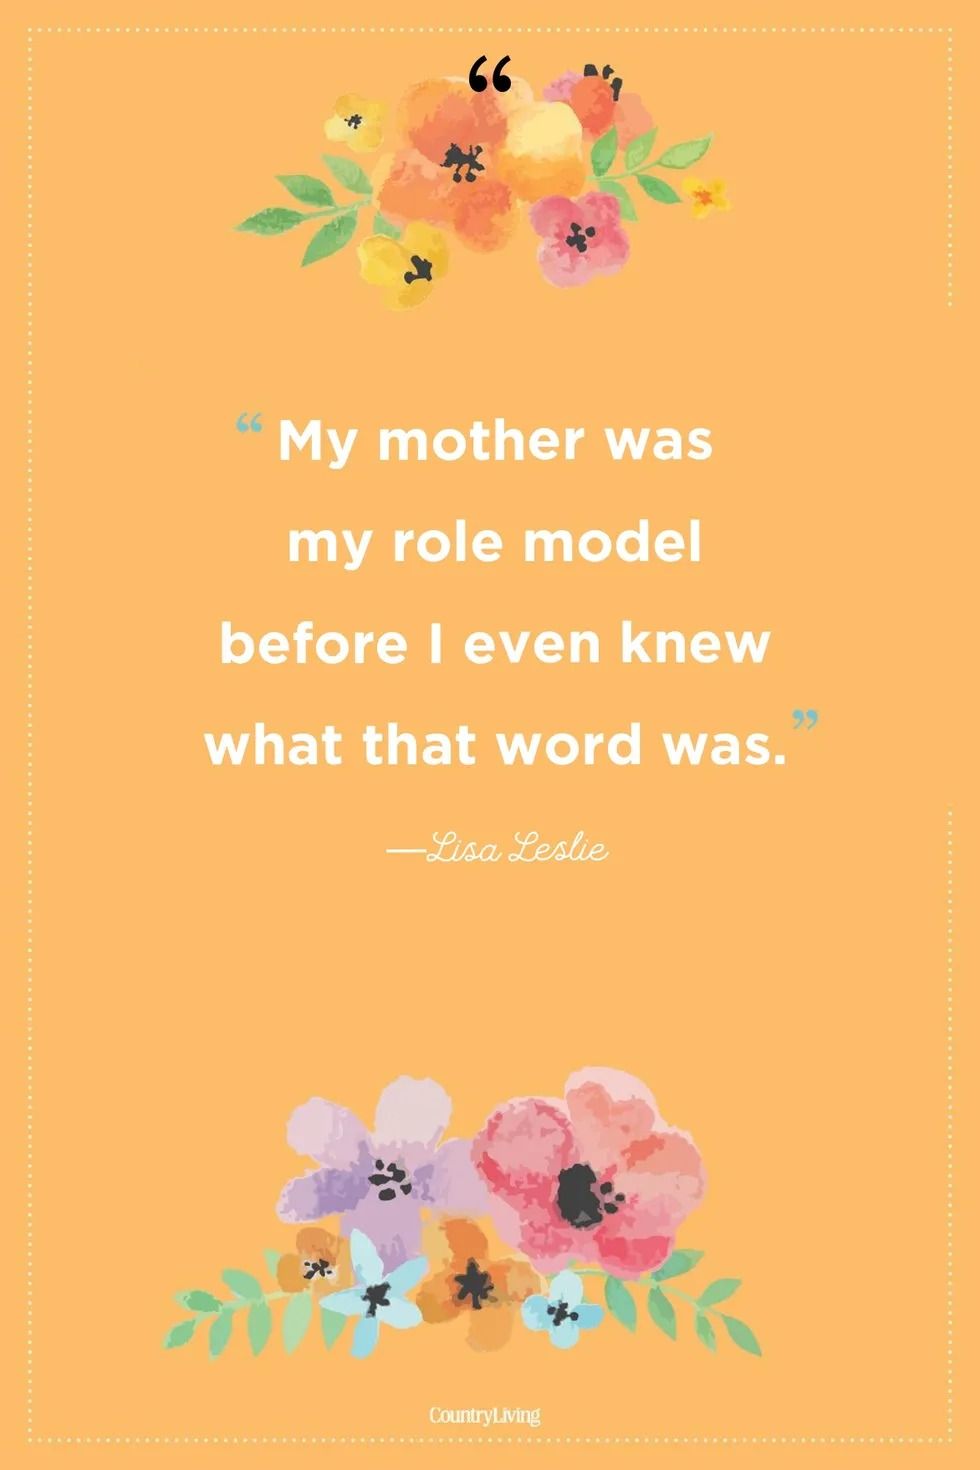 lisa leslie quote about moms